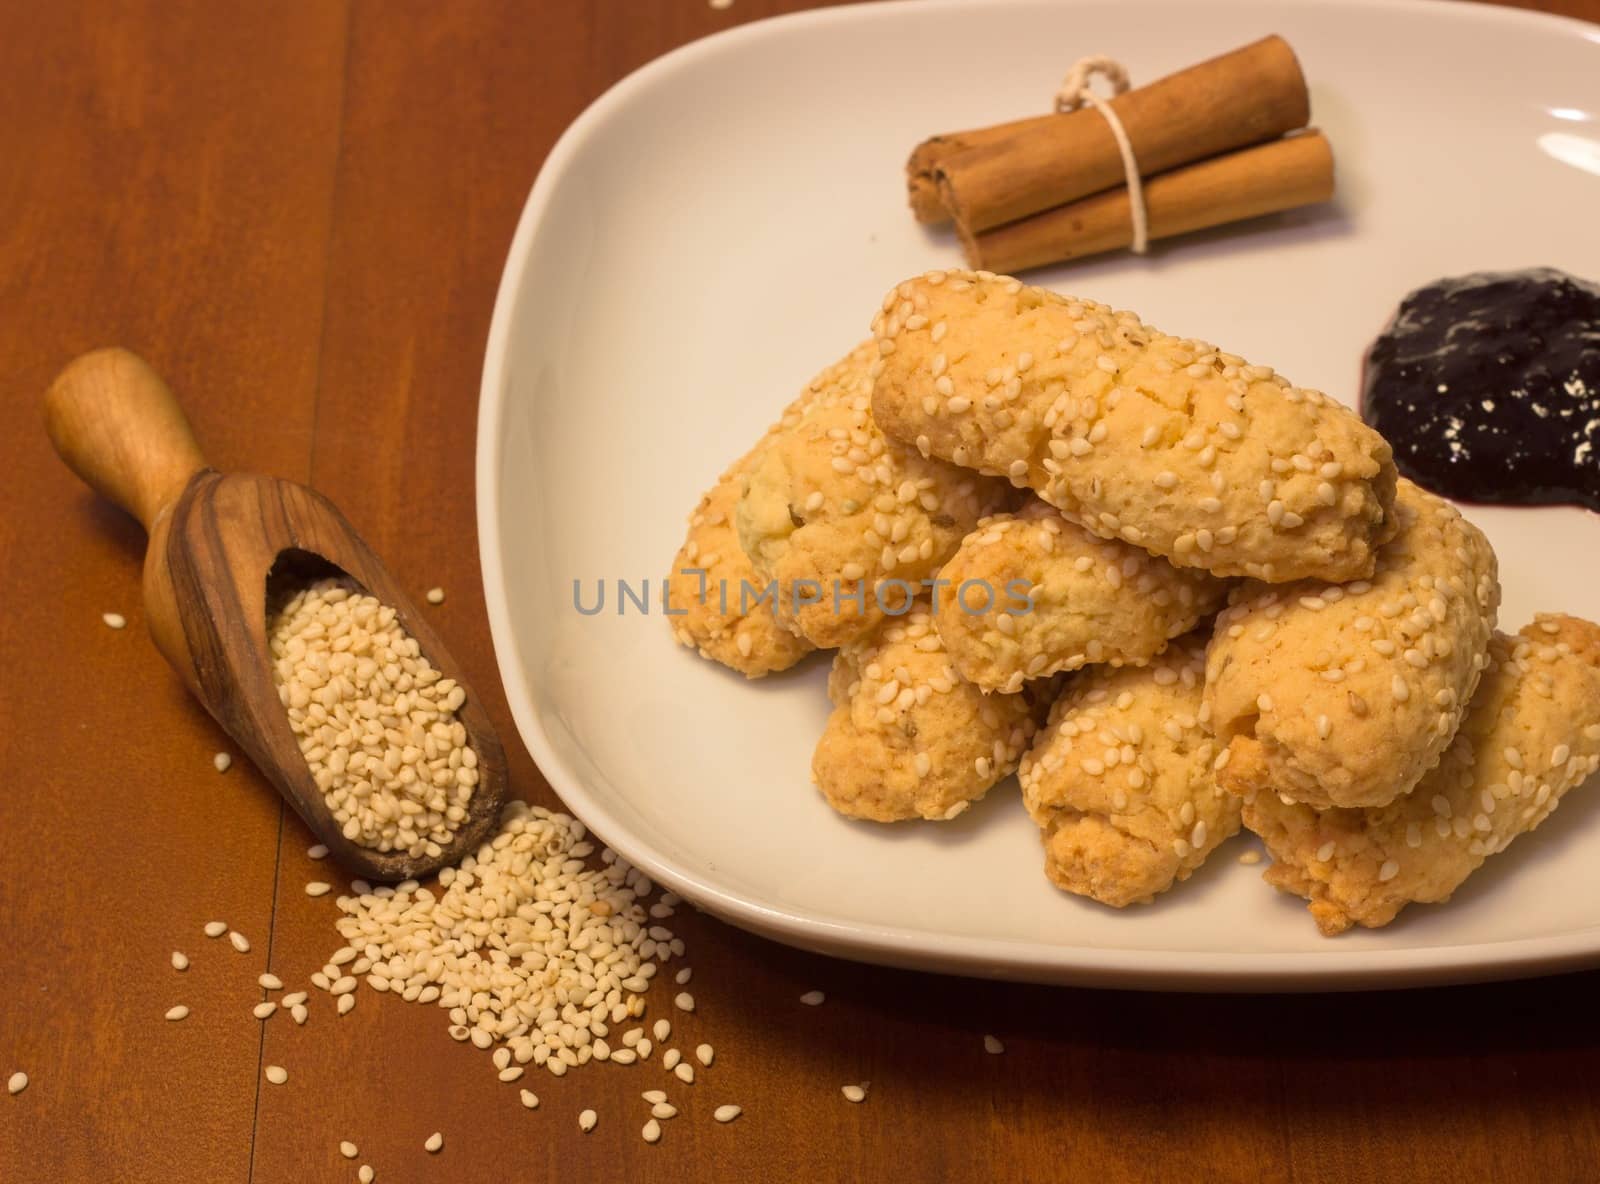 biscuit with sesame sweet and fragrant good breakfast